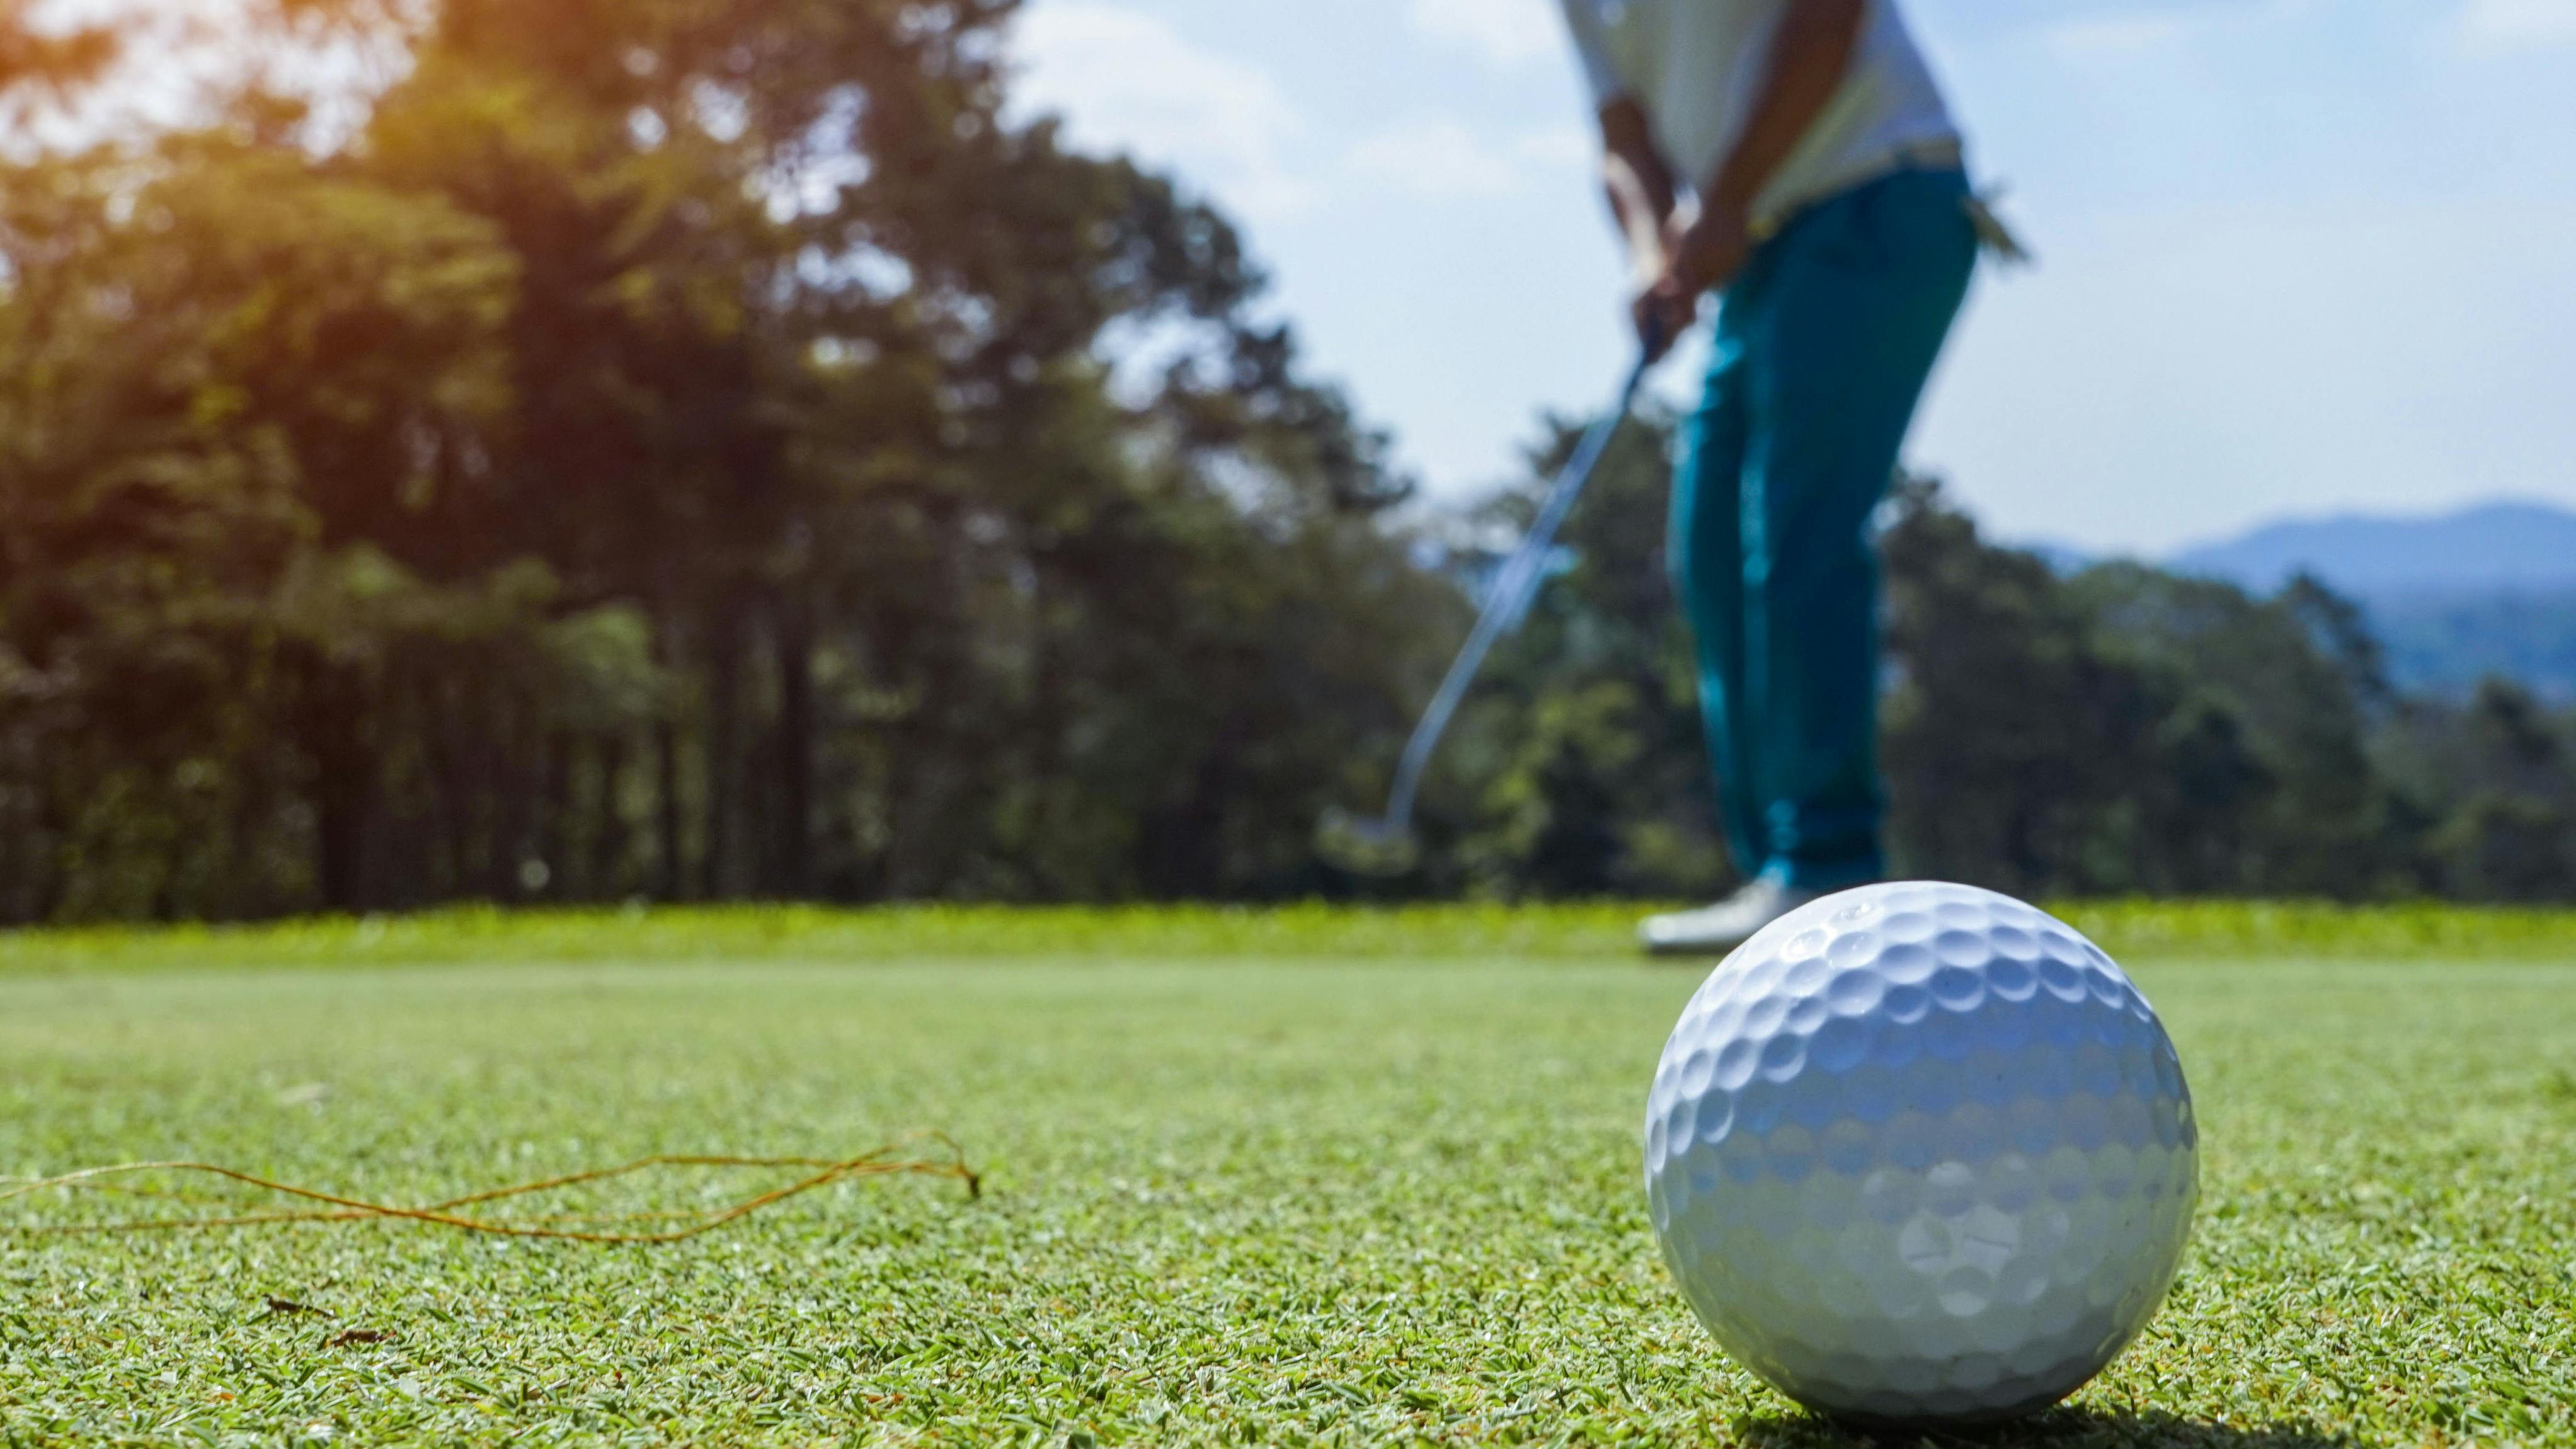 Close up of a golf ball rolling as a golfer stands in the background holding a putter.